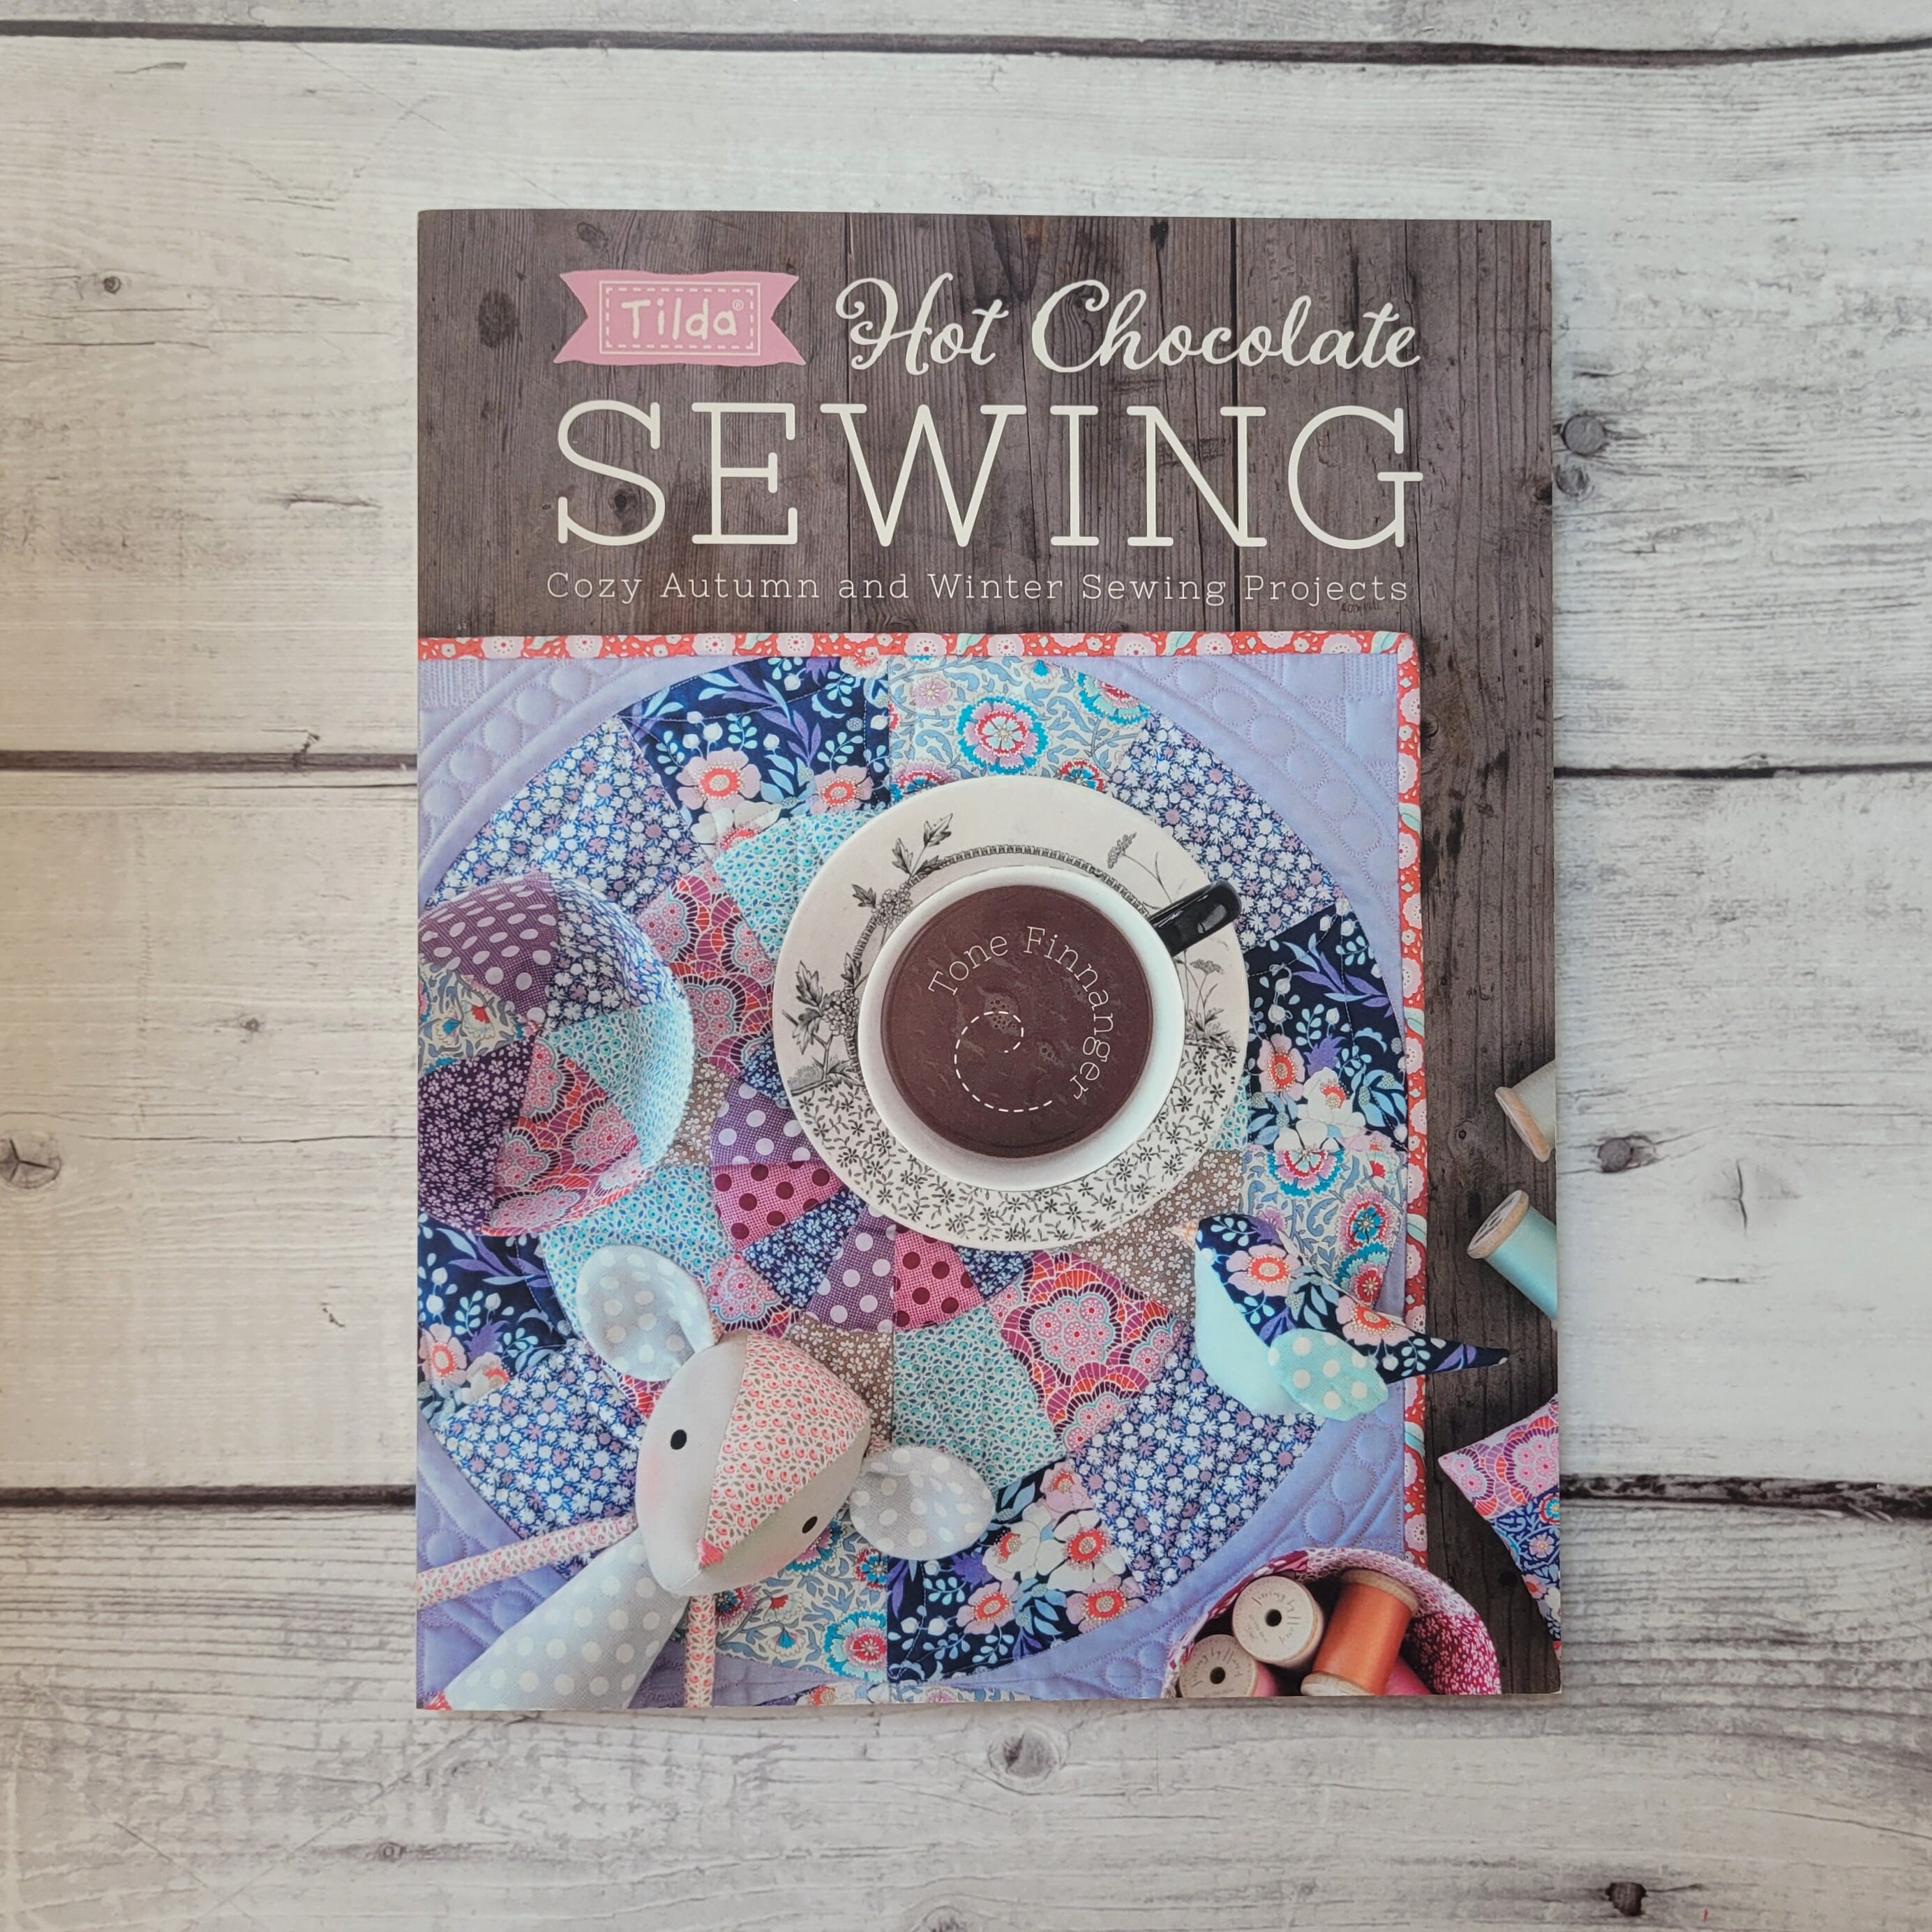 Tilda Hot Chocolate Sewing: Cozy Autumn and Winter Sewing Projects [Book]